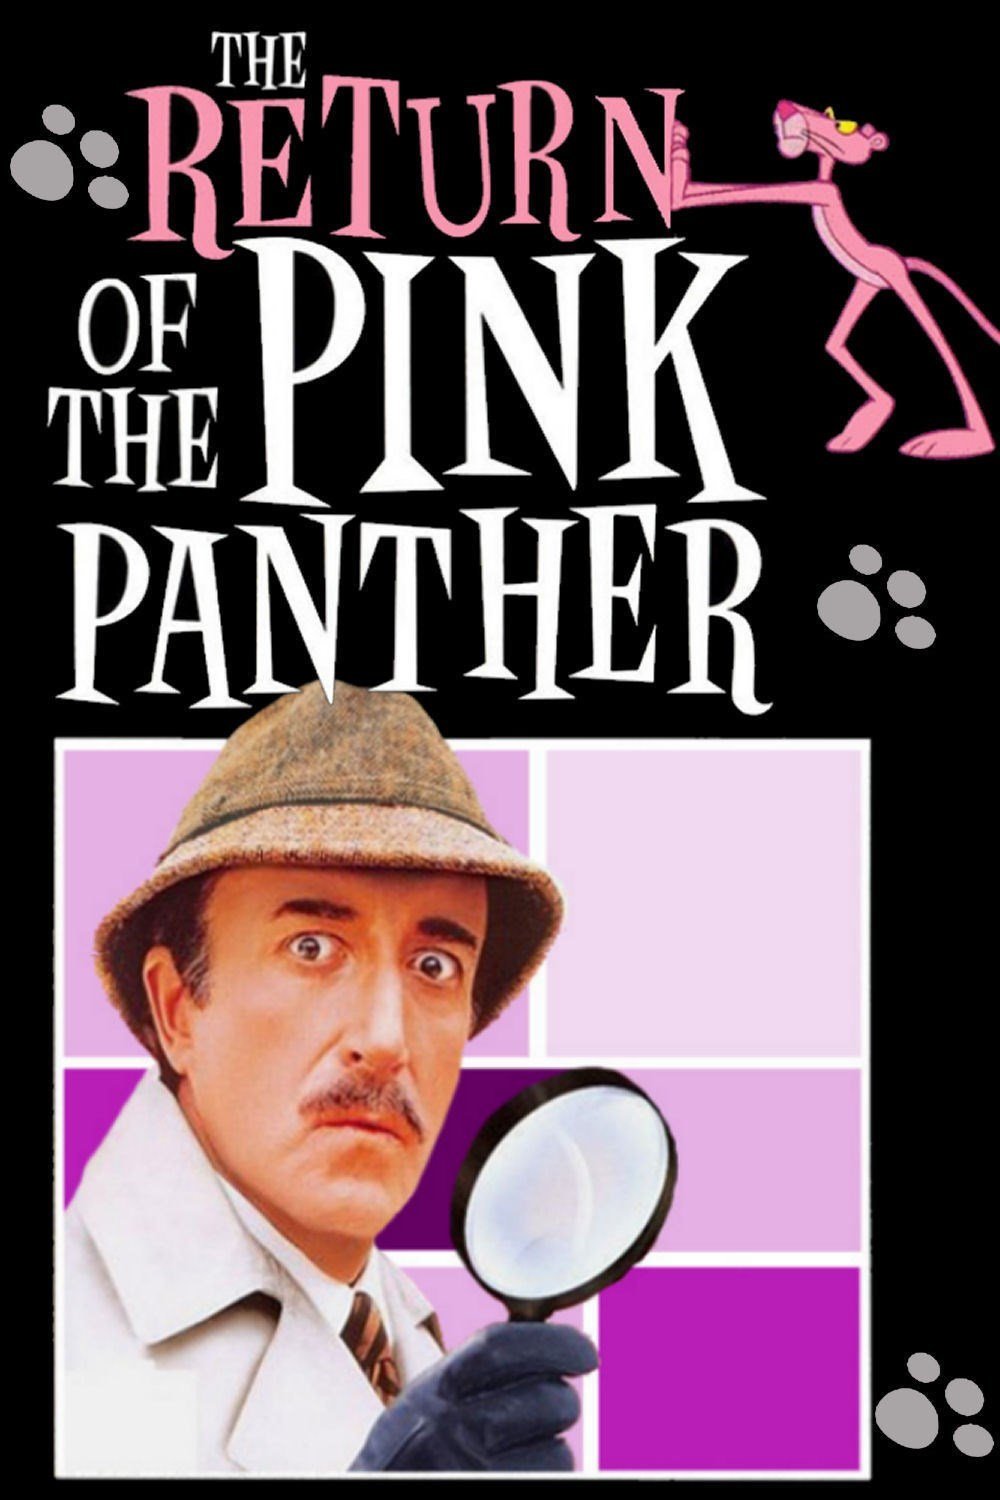 L'affiche du film The Return of the Pink Panther